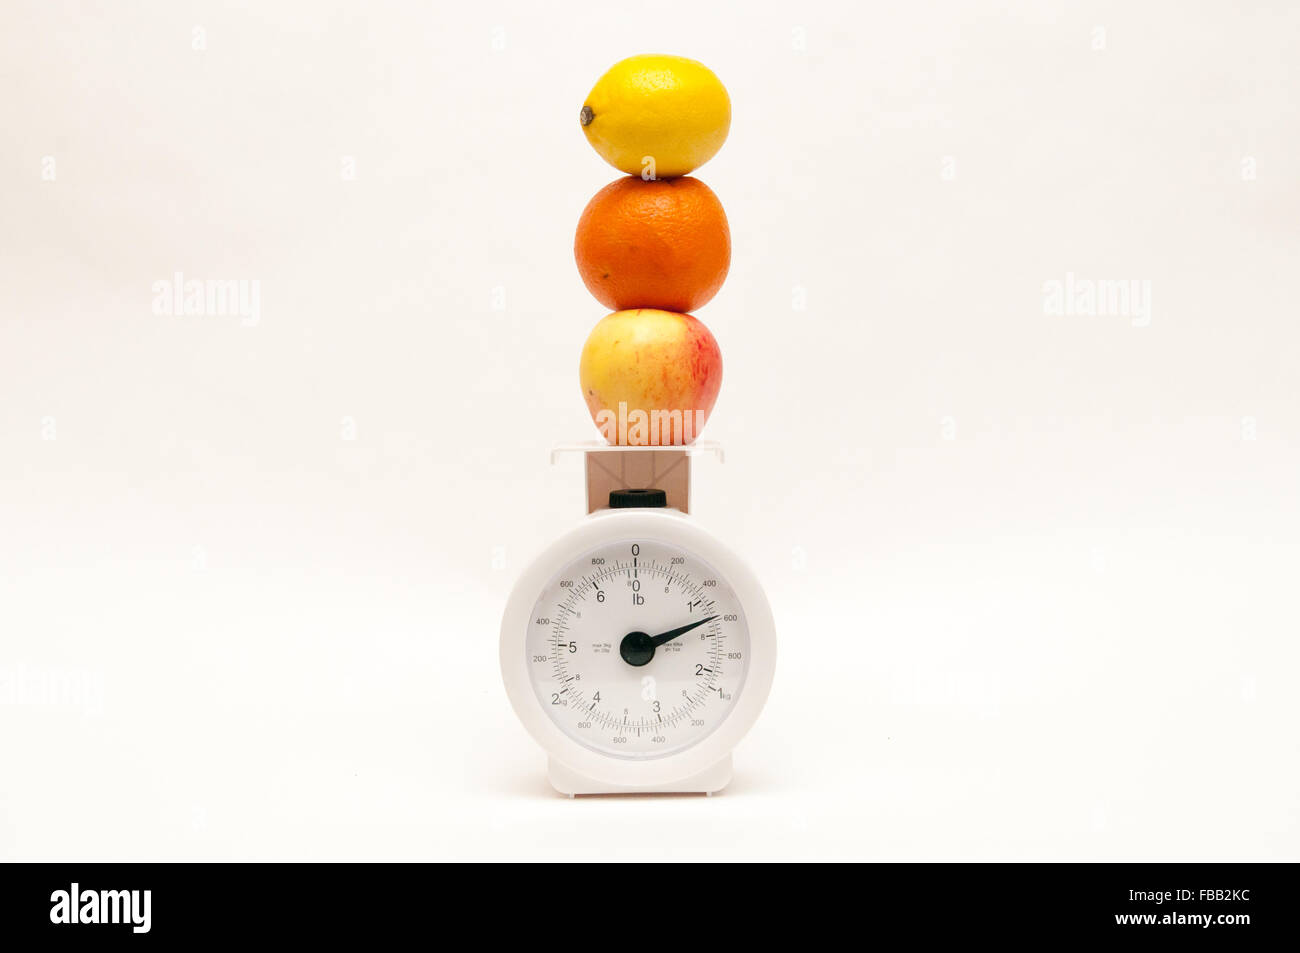 Concept of balanced diet and weight loss Stock Photo